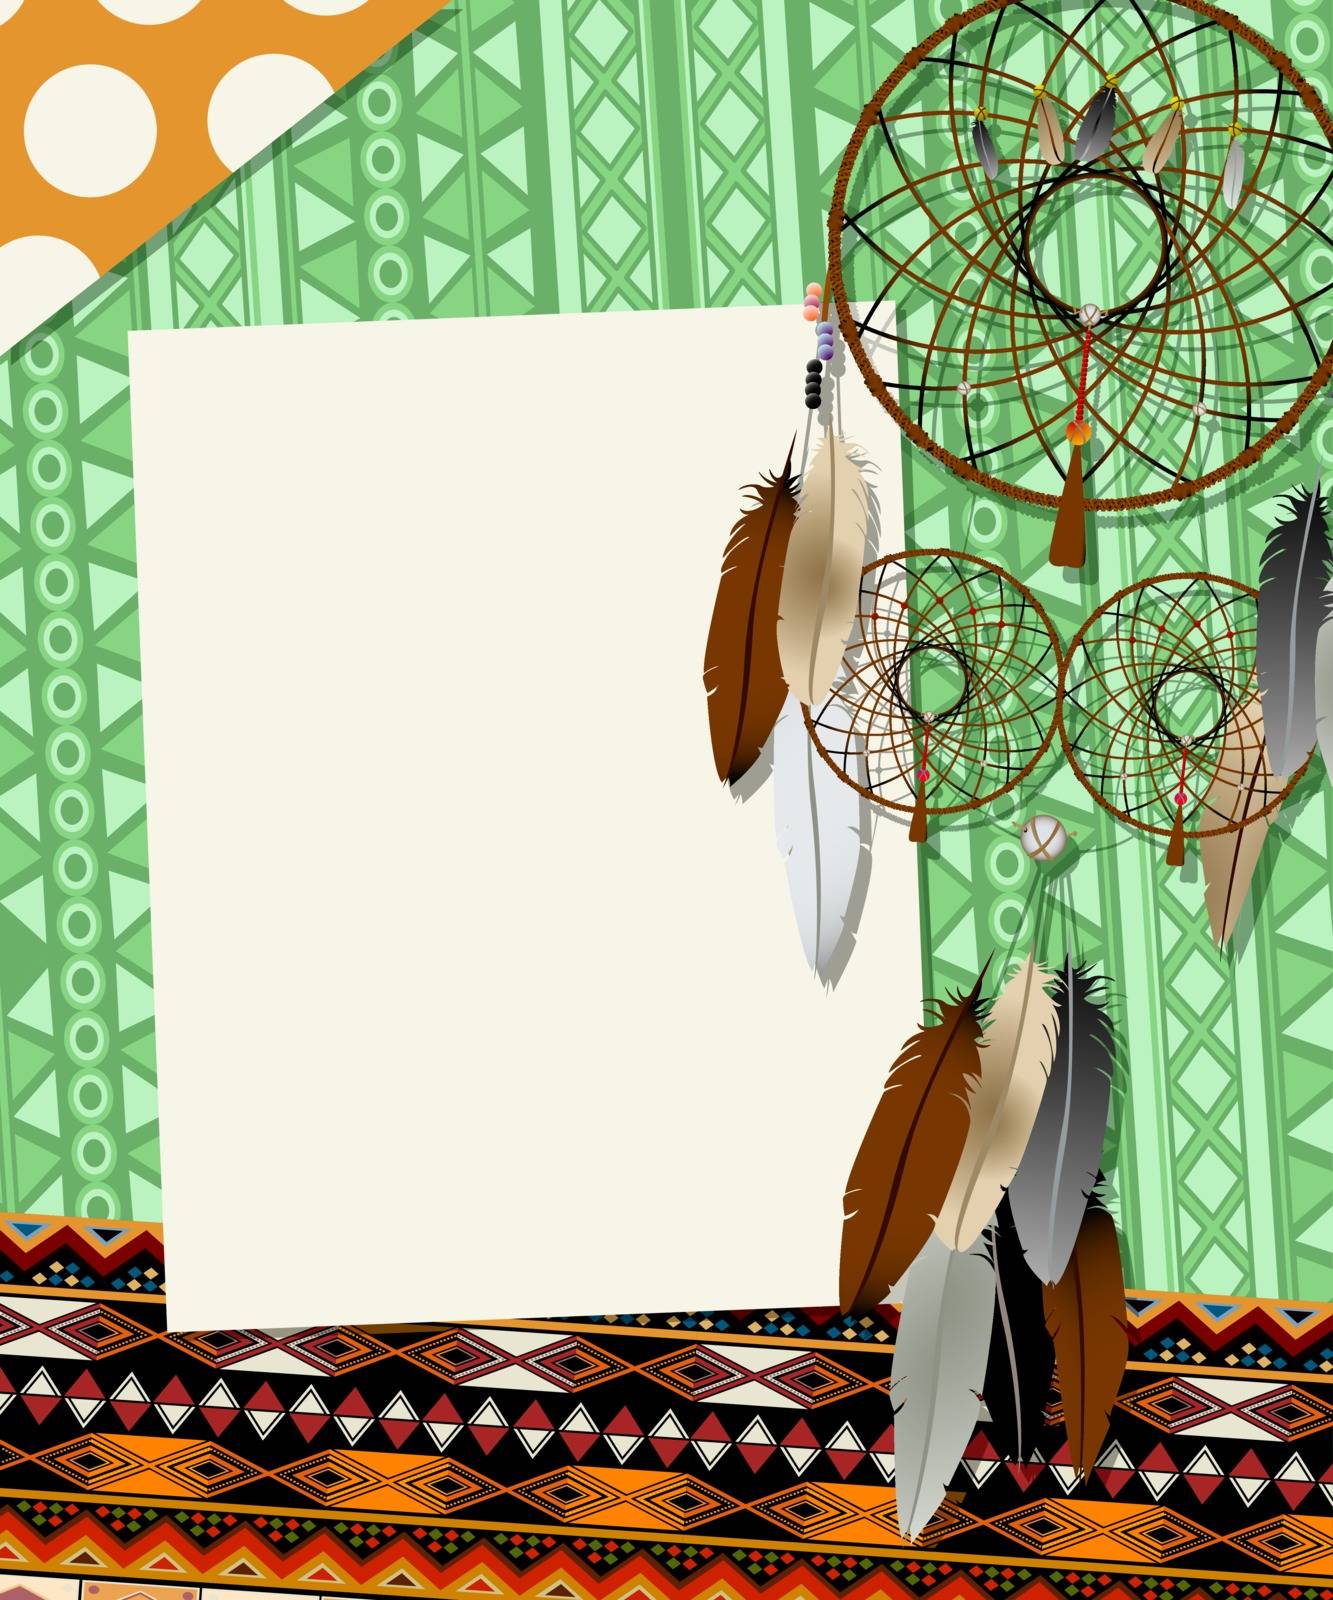 Text card, collage with american indian dream catcher